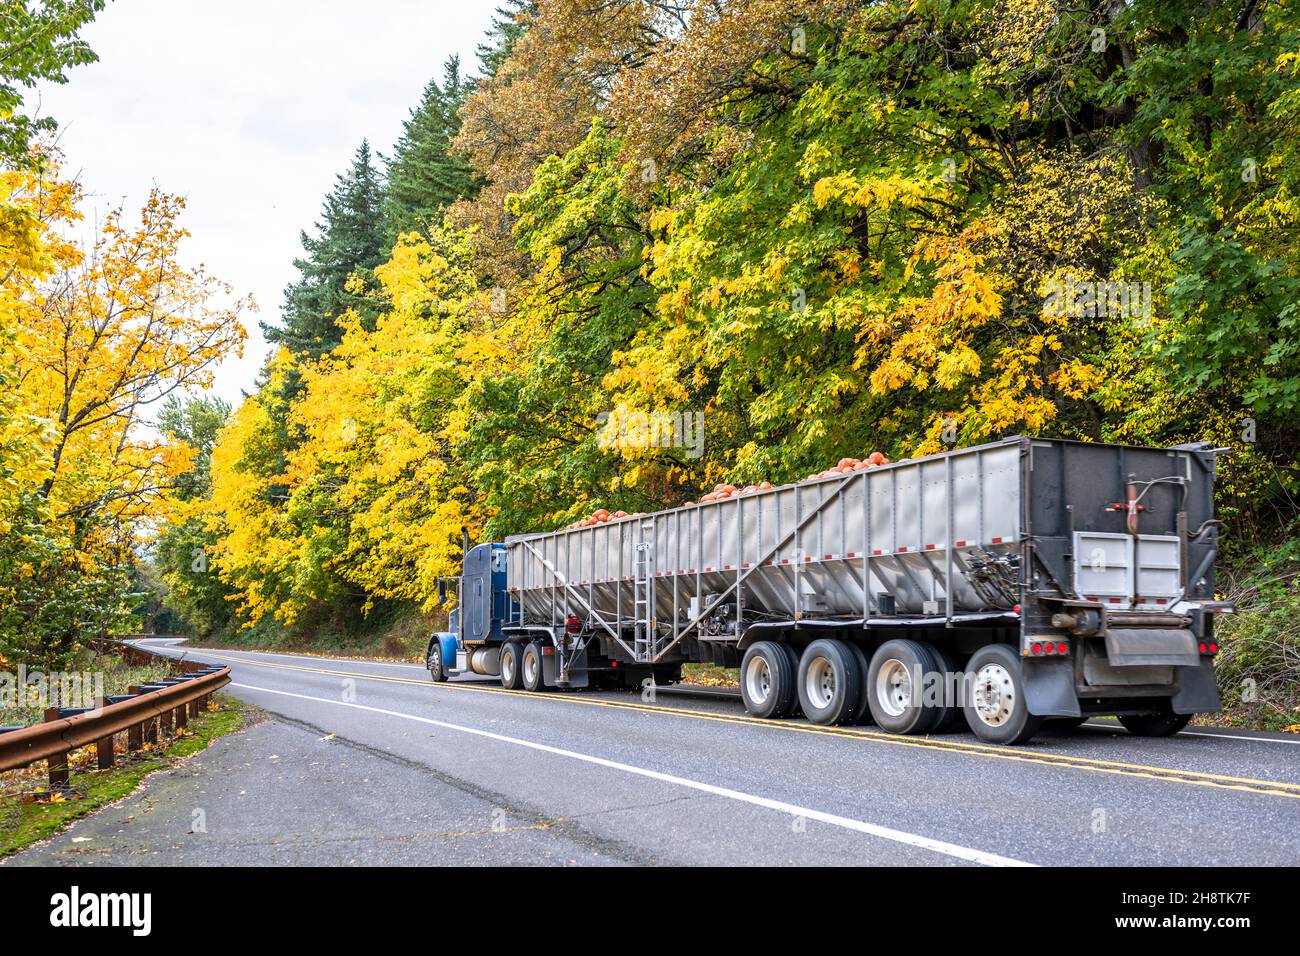 Industrial big rig blue semi truck tractor transporting pumpkin harvest in long bulk semi trailer driving on the divided winding highway road with aut Stock Photo